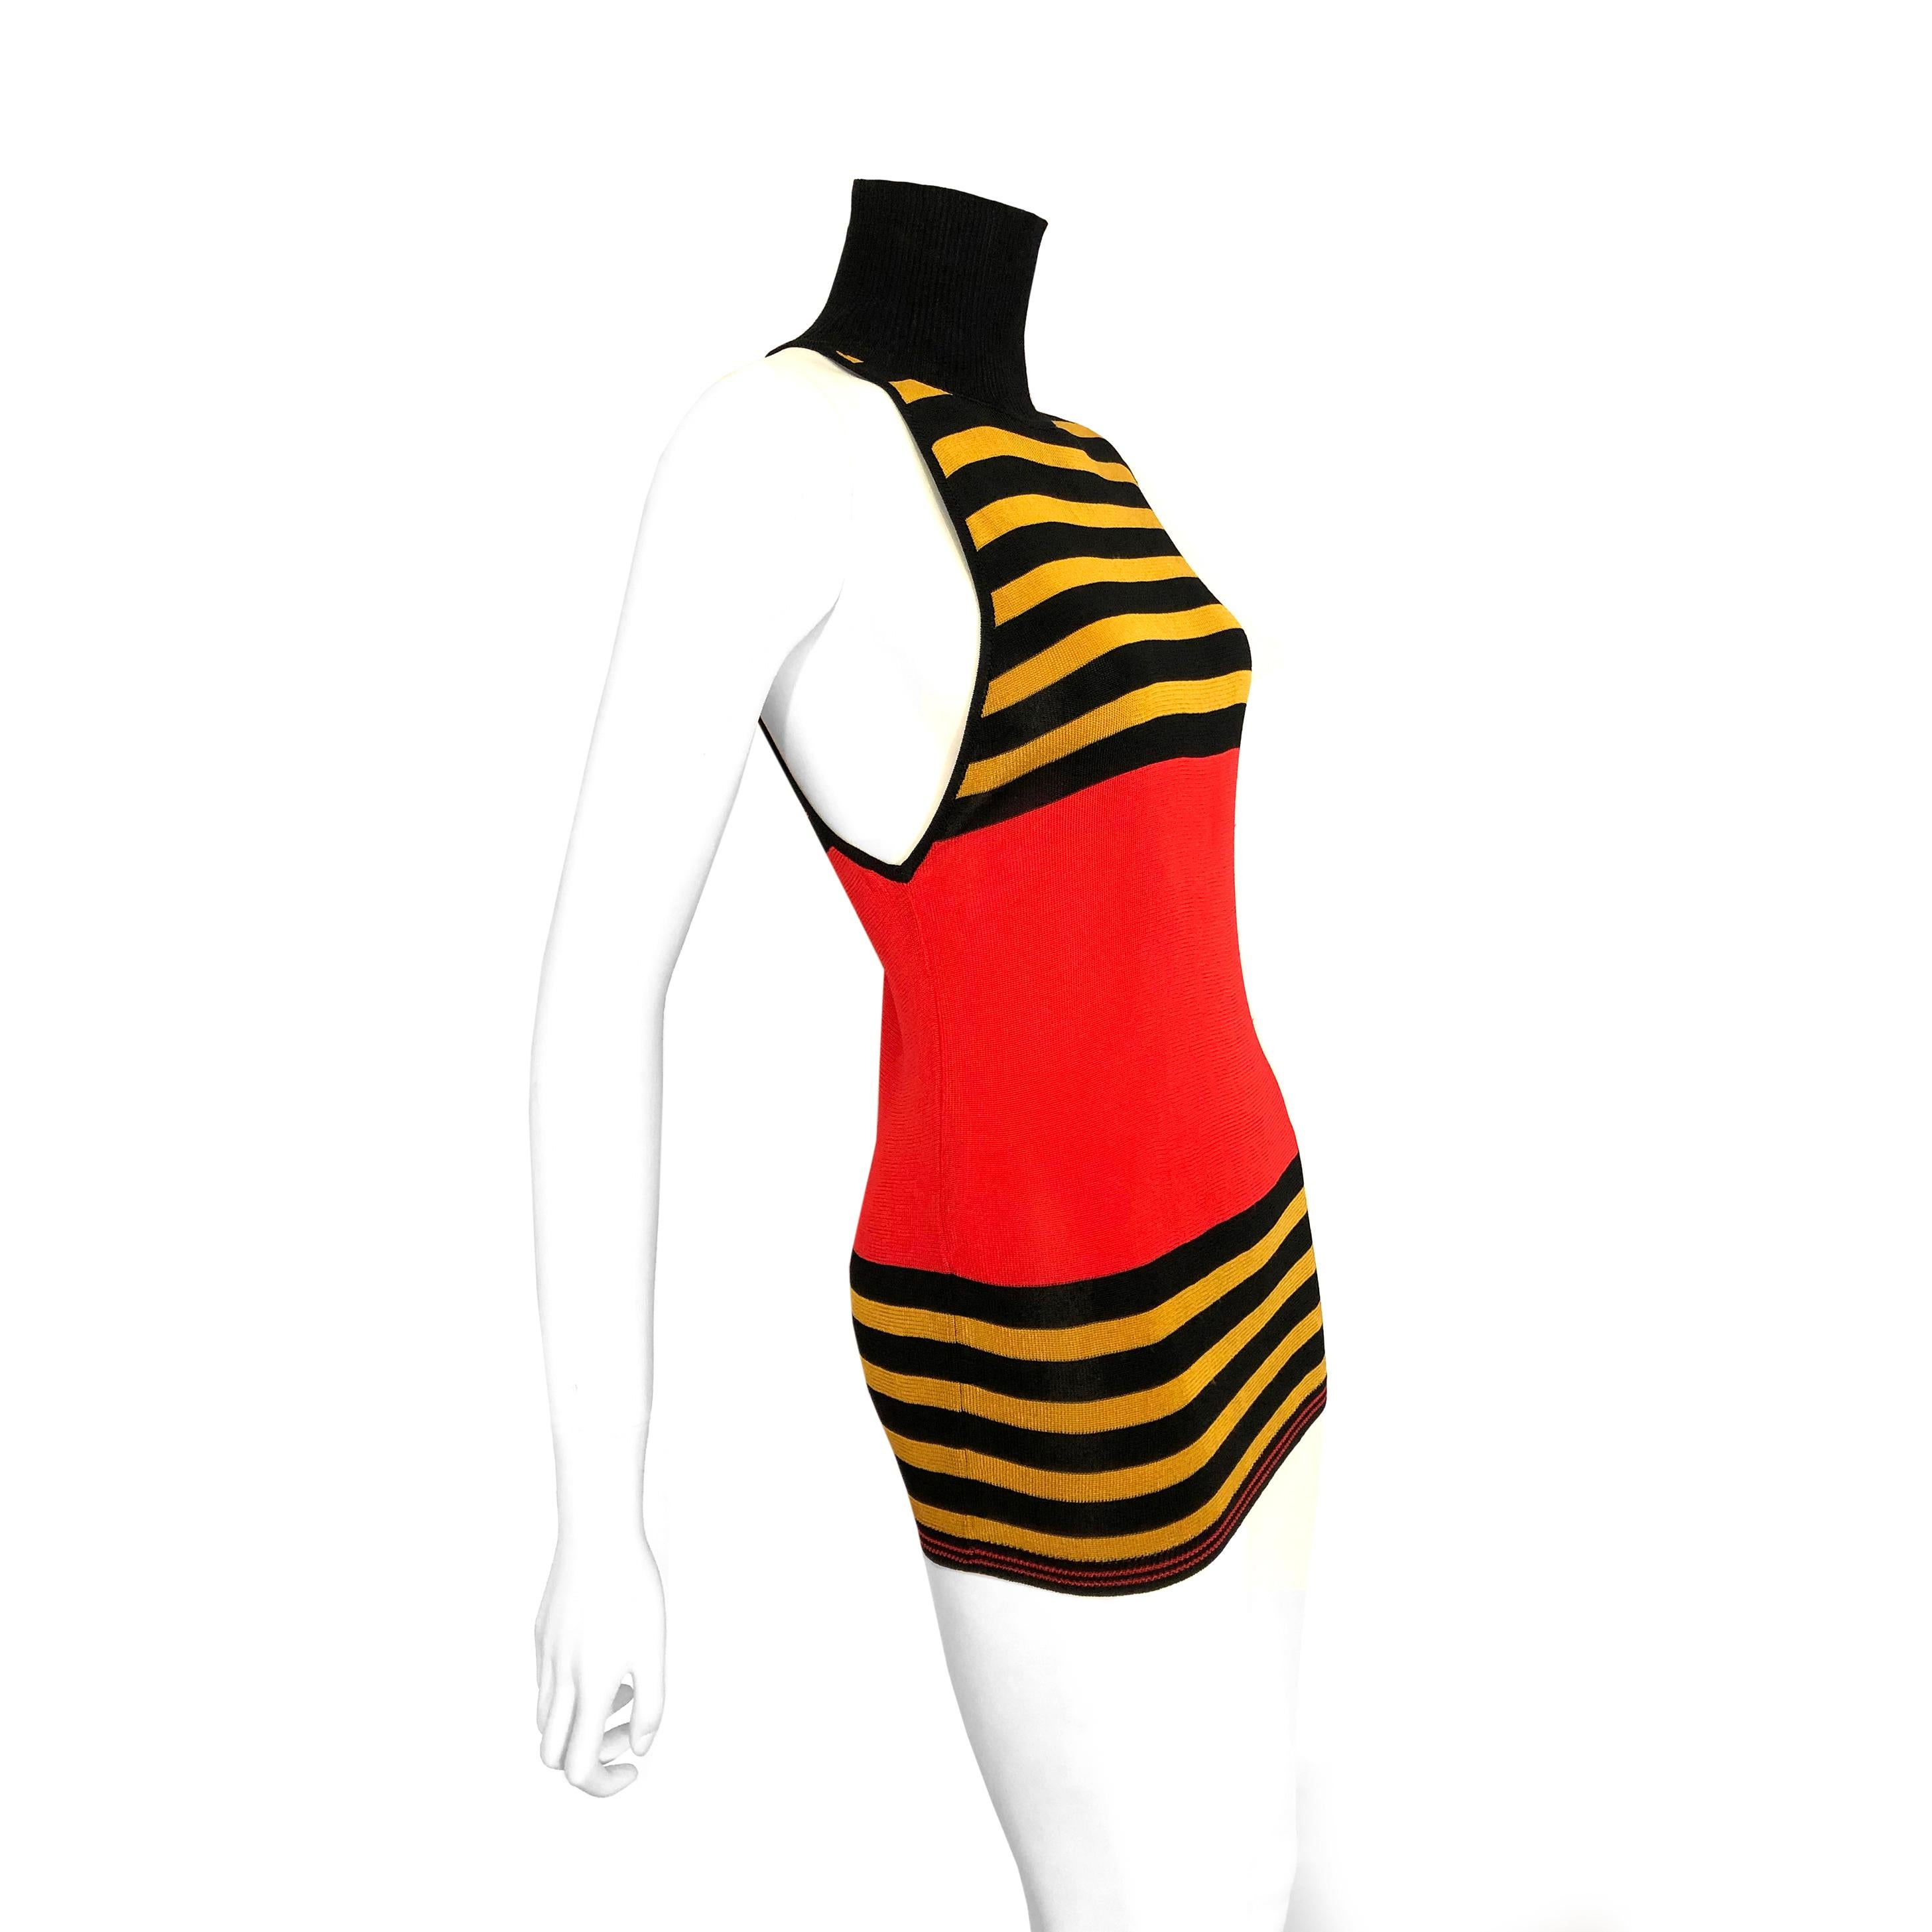 Product Details: Gianni Versace Couture - 1980s Vintage Top / Lightweight Knitted Top / Mustard-Gold, Orange-Red + Black Stripes - Asymmetric Sleeve Detailing - Ribbed Polo Neck Worn - Two Ways.
Label: Gianni Versace Couture
Era: 1980s Vintage
Size: